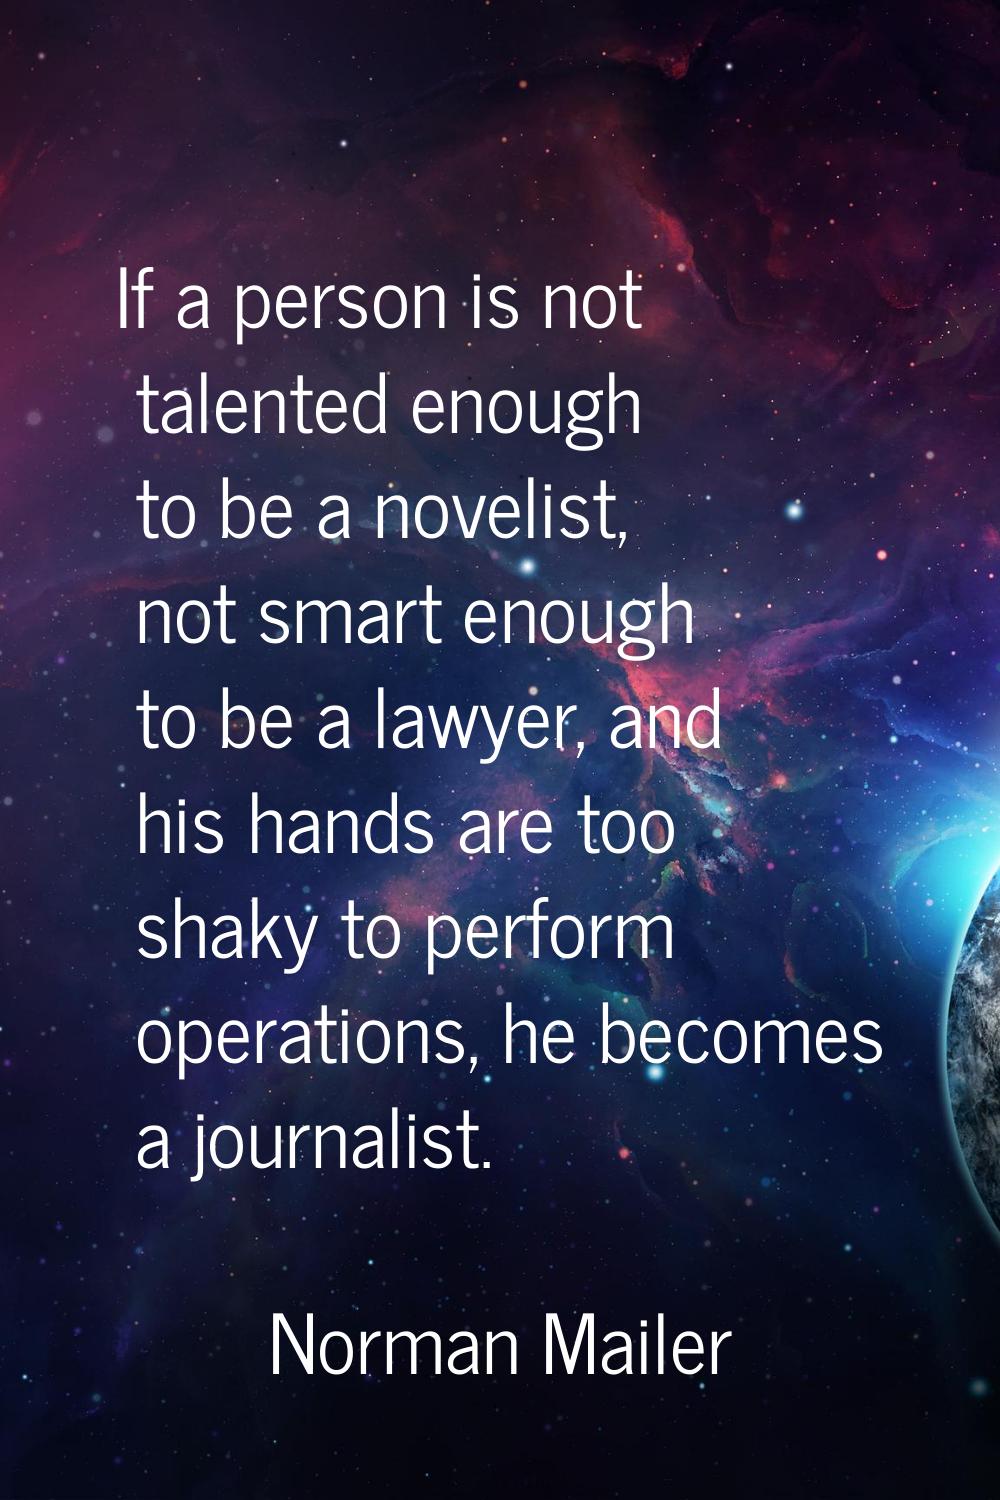 If a person is not talented enough to be a novelist, not smart enough to be a lawyer, and his hands